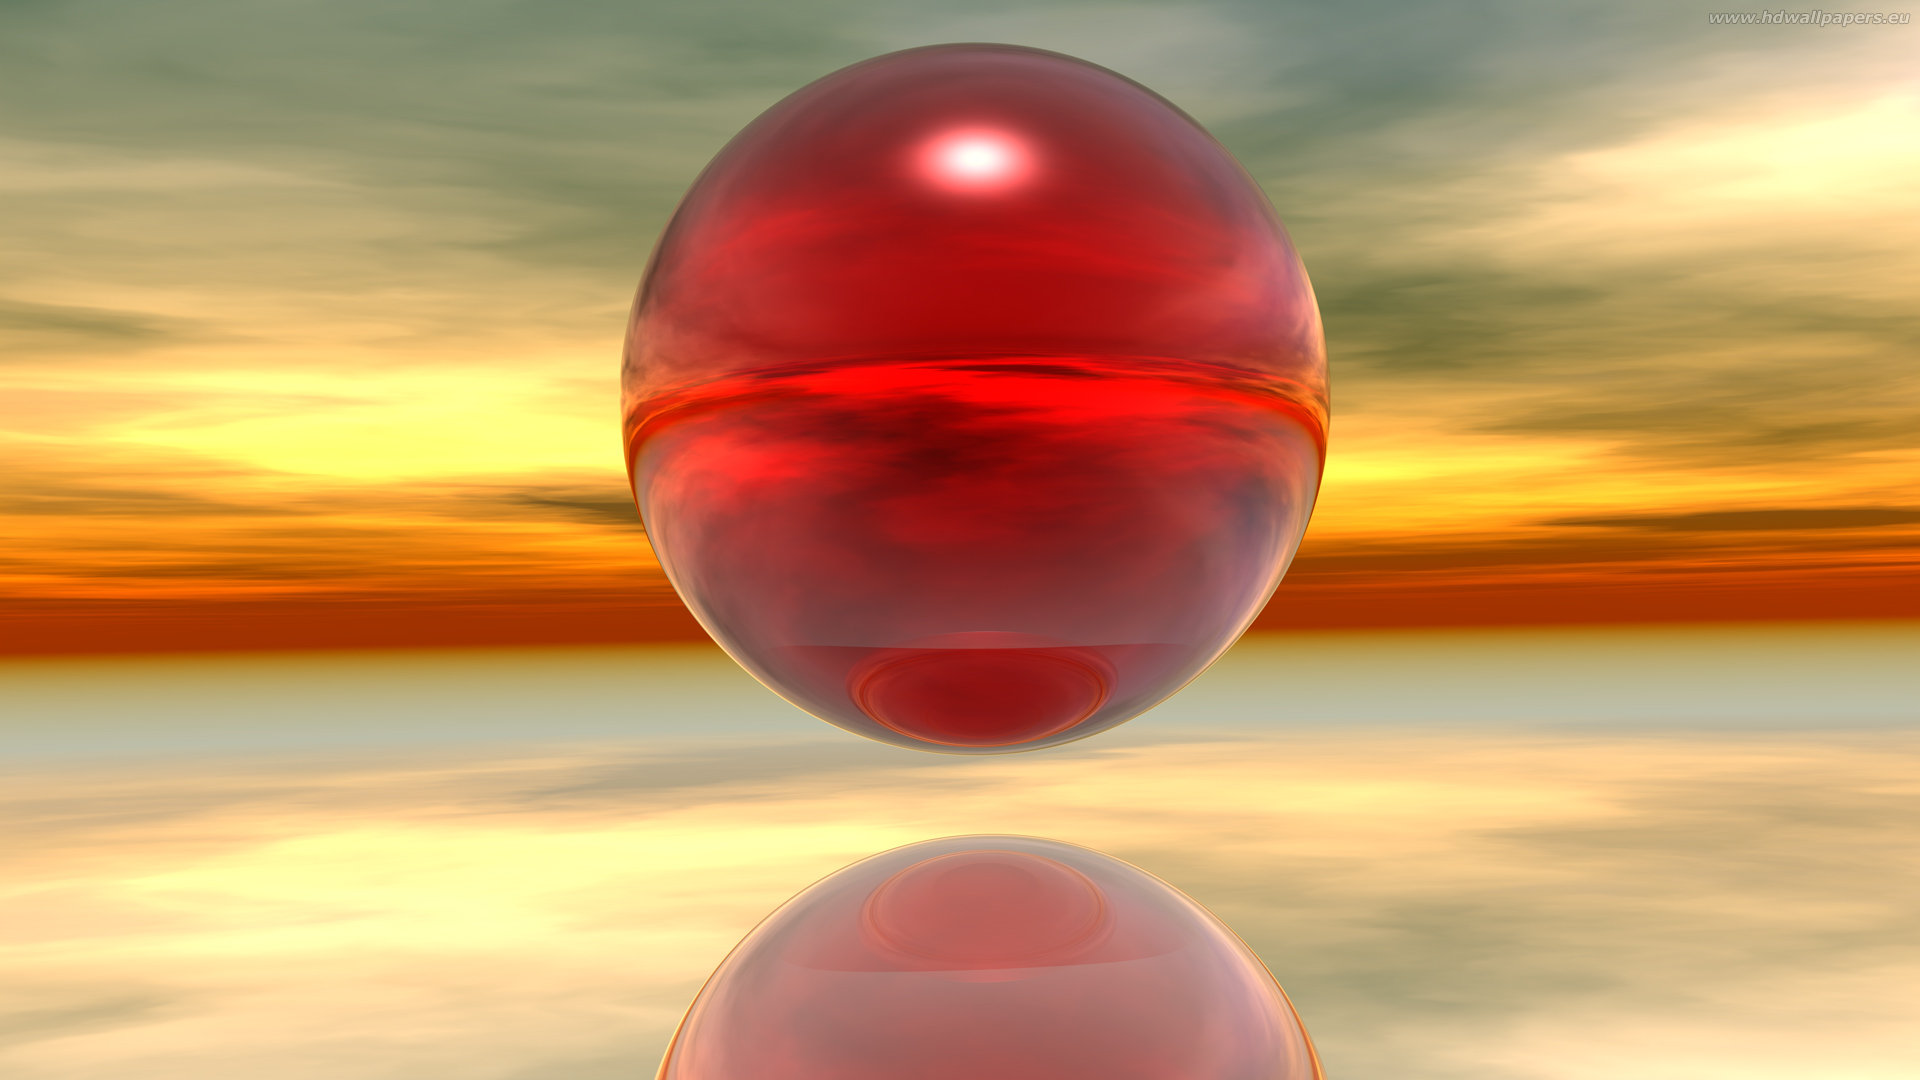 red-sphere_1920x1080